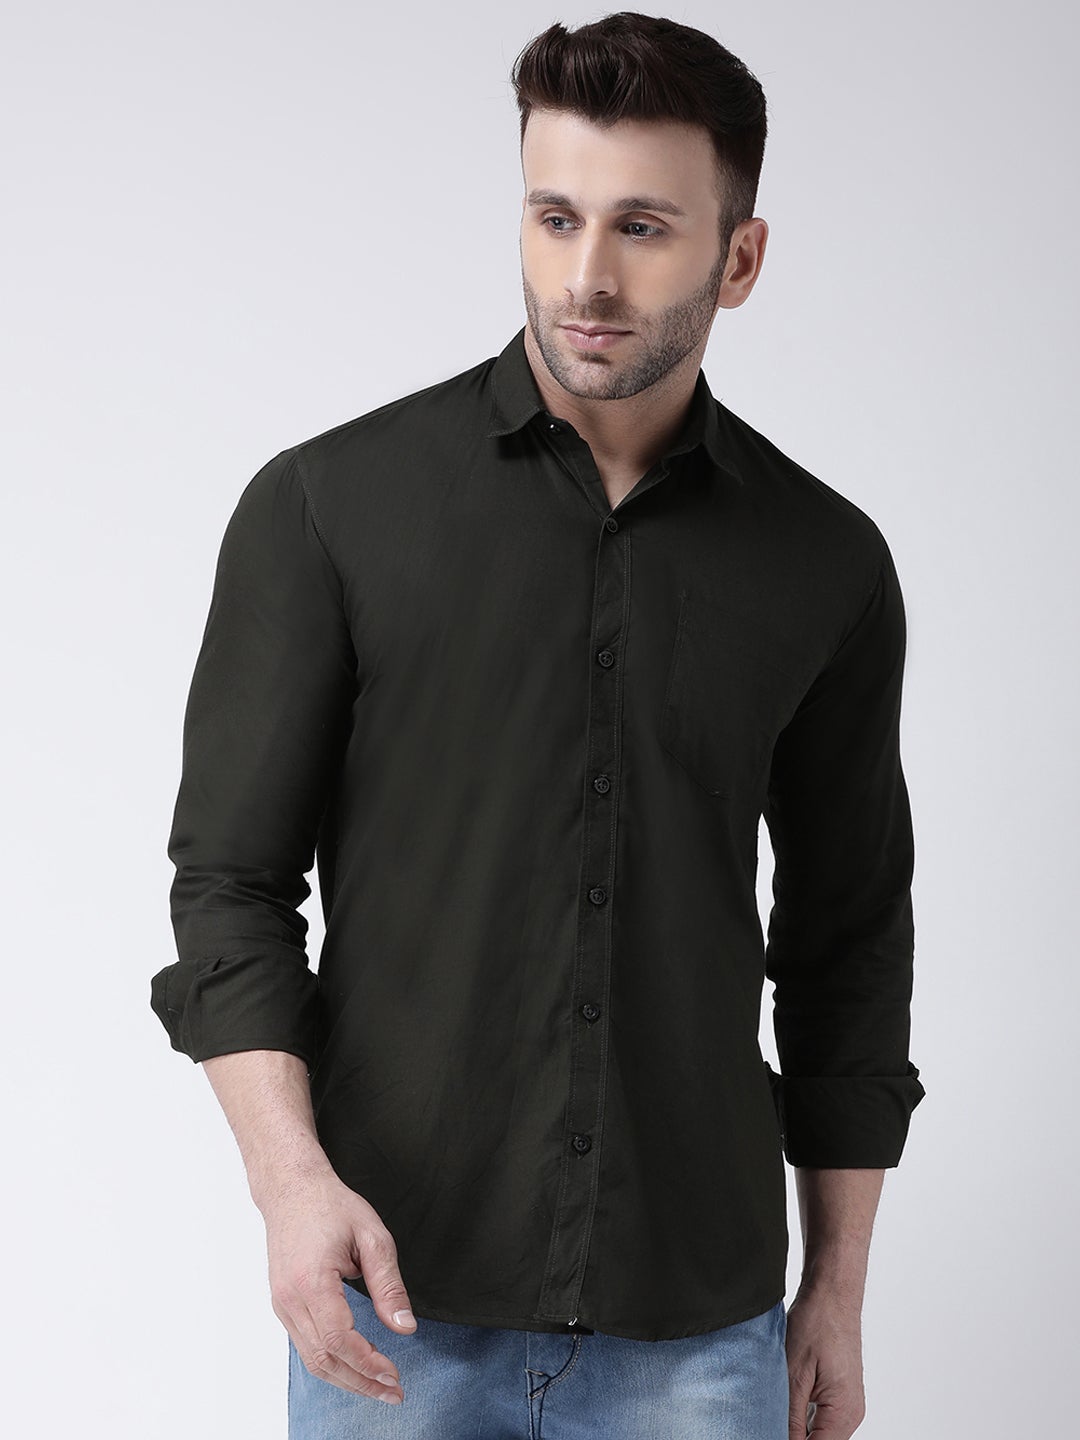 Men's Casual Olive Shirt